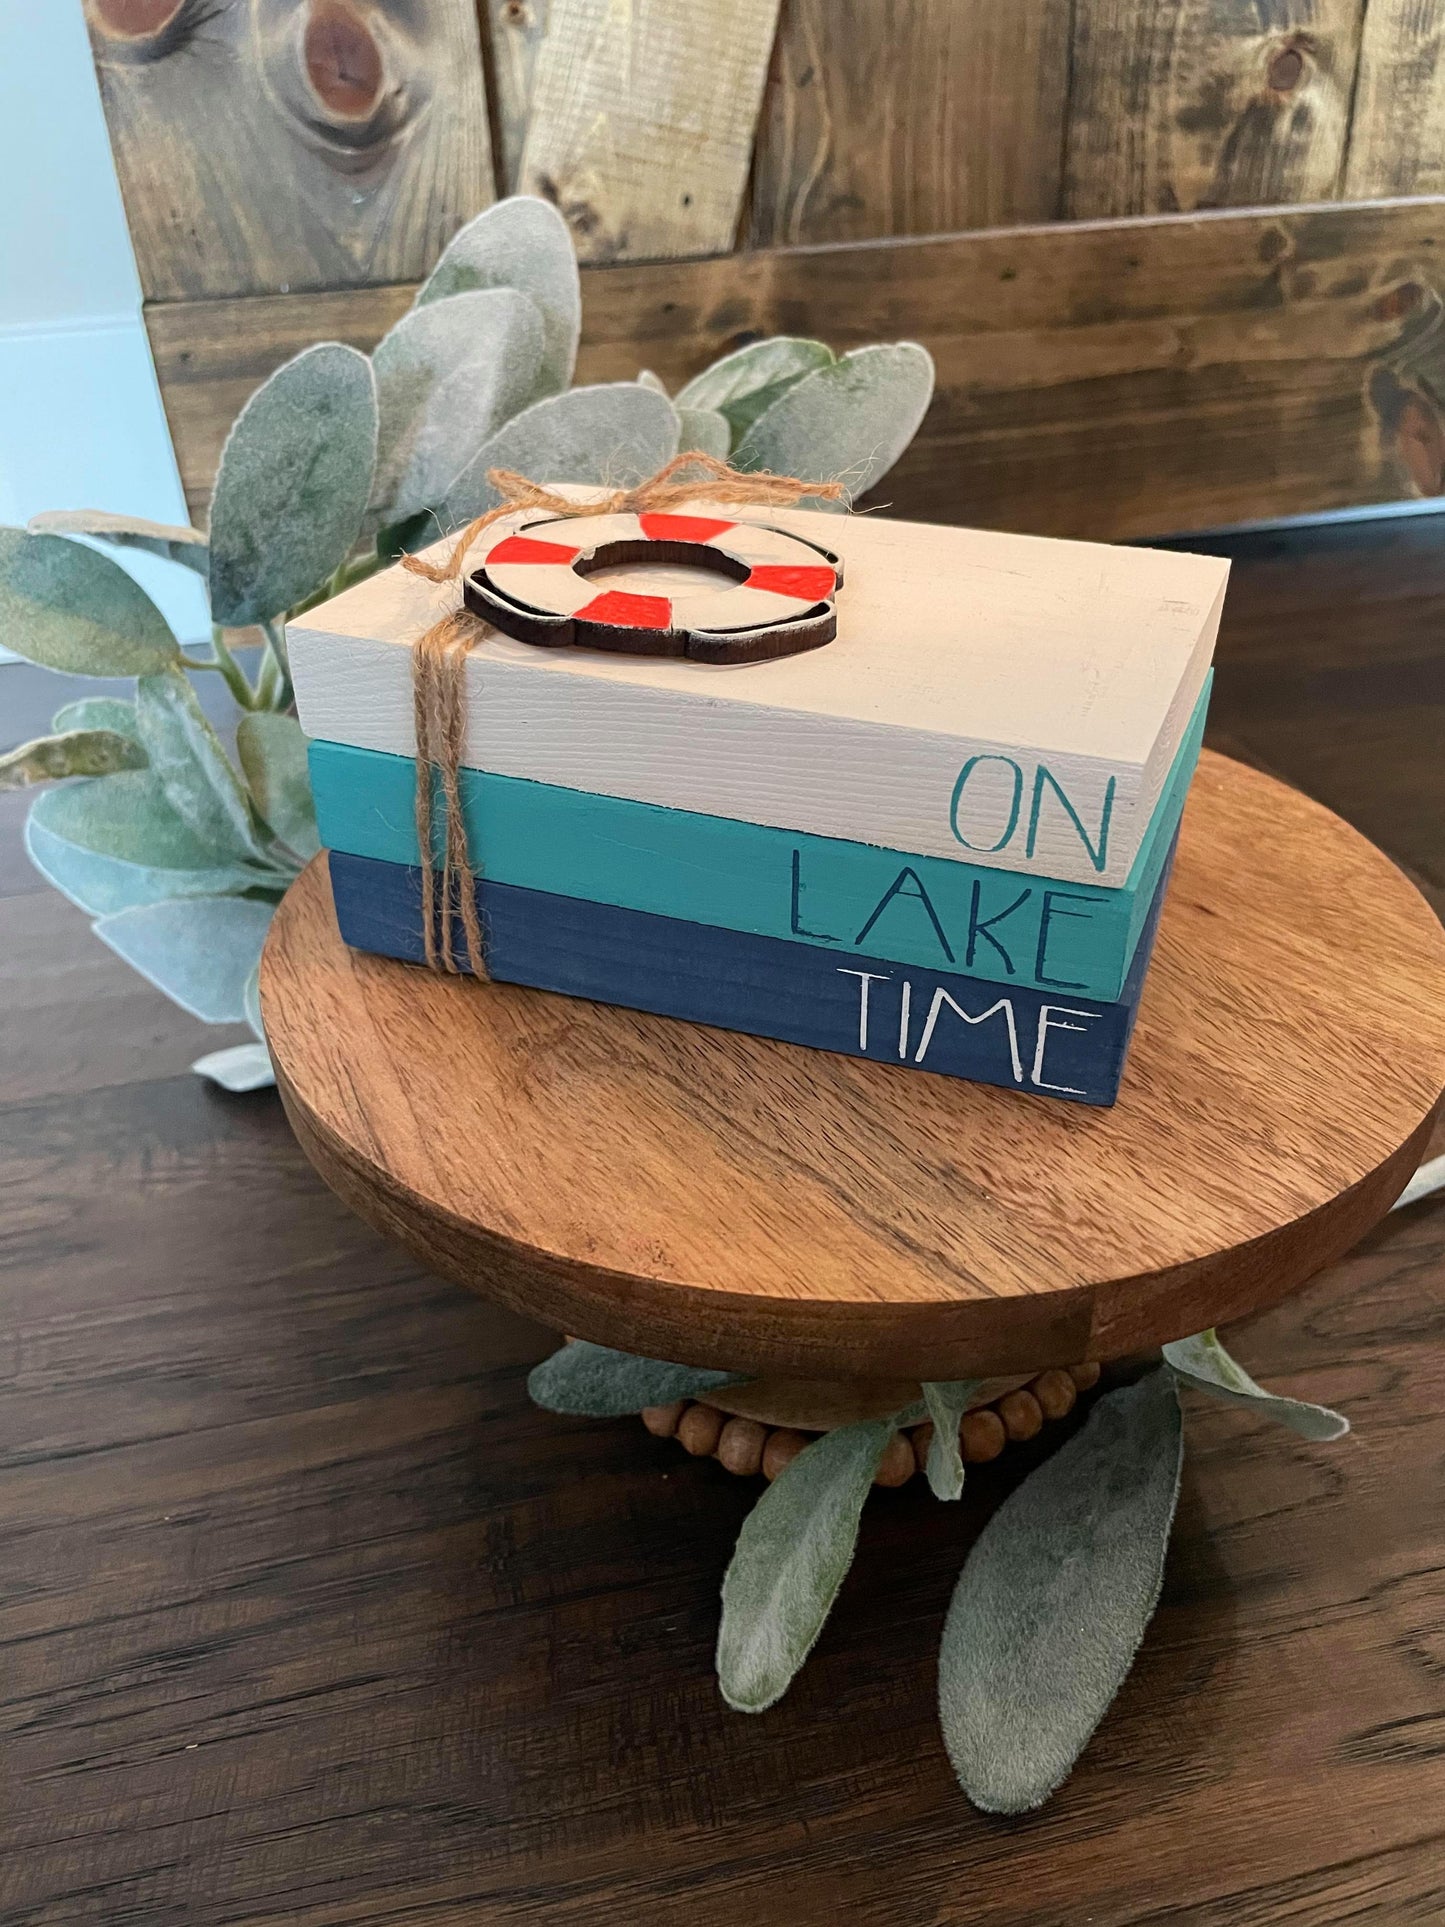 Tiered Tray Mini Book Stack - On lake time